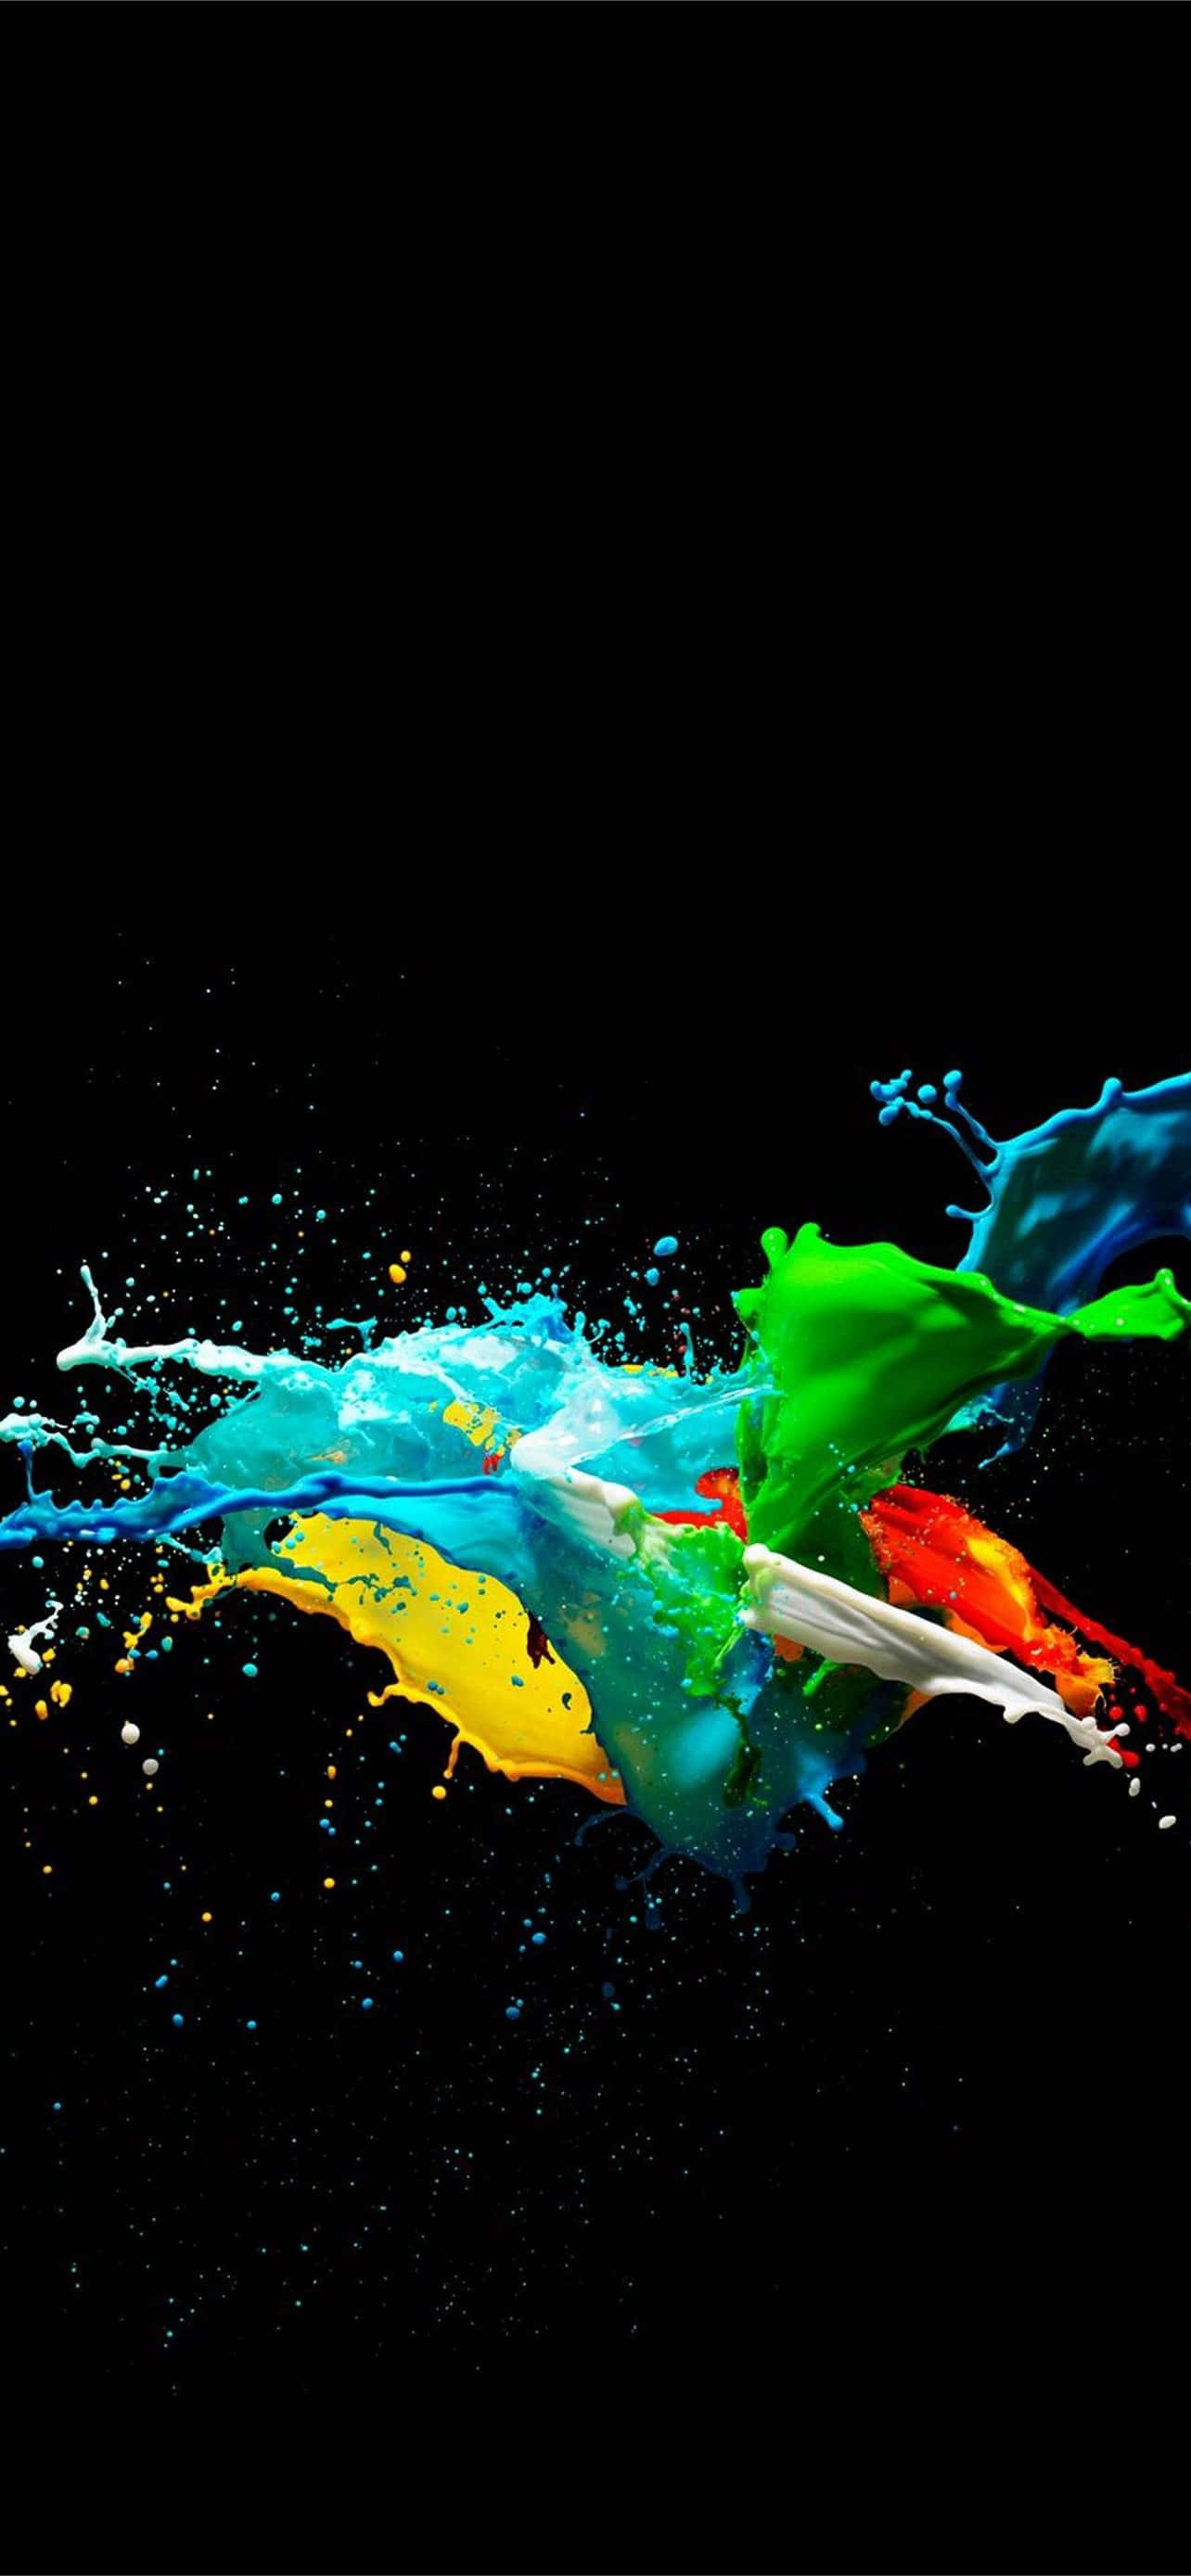 Impressively Vivid Display of the Galaxy Note Wallpaper